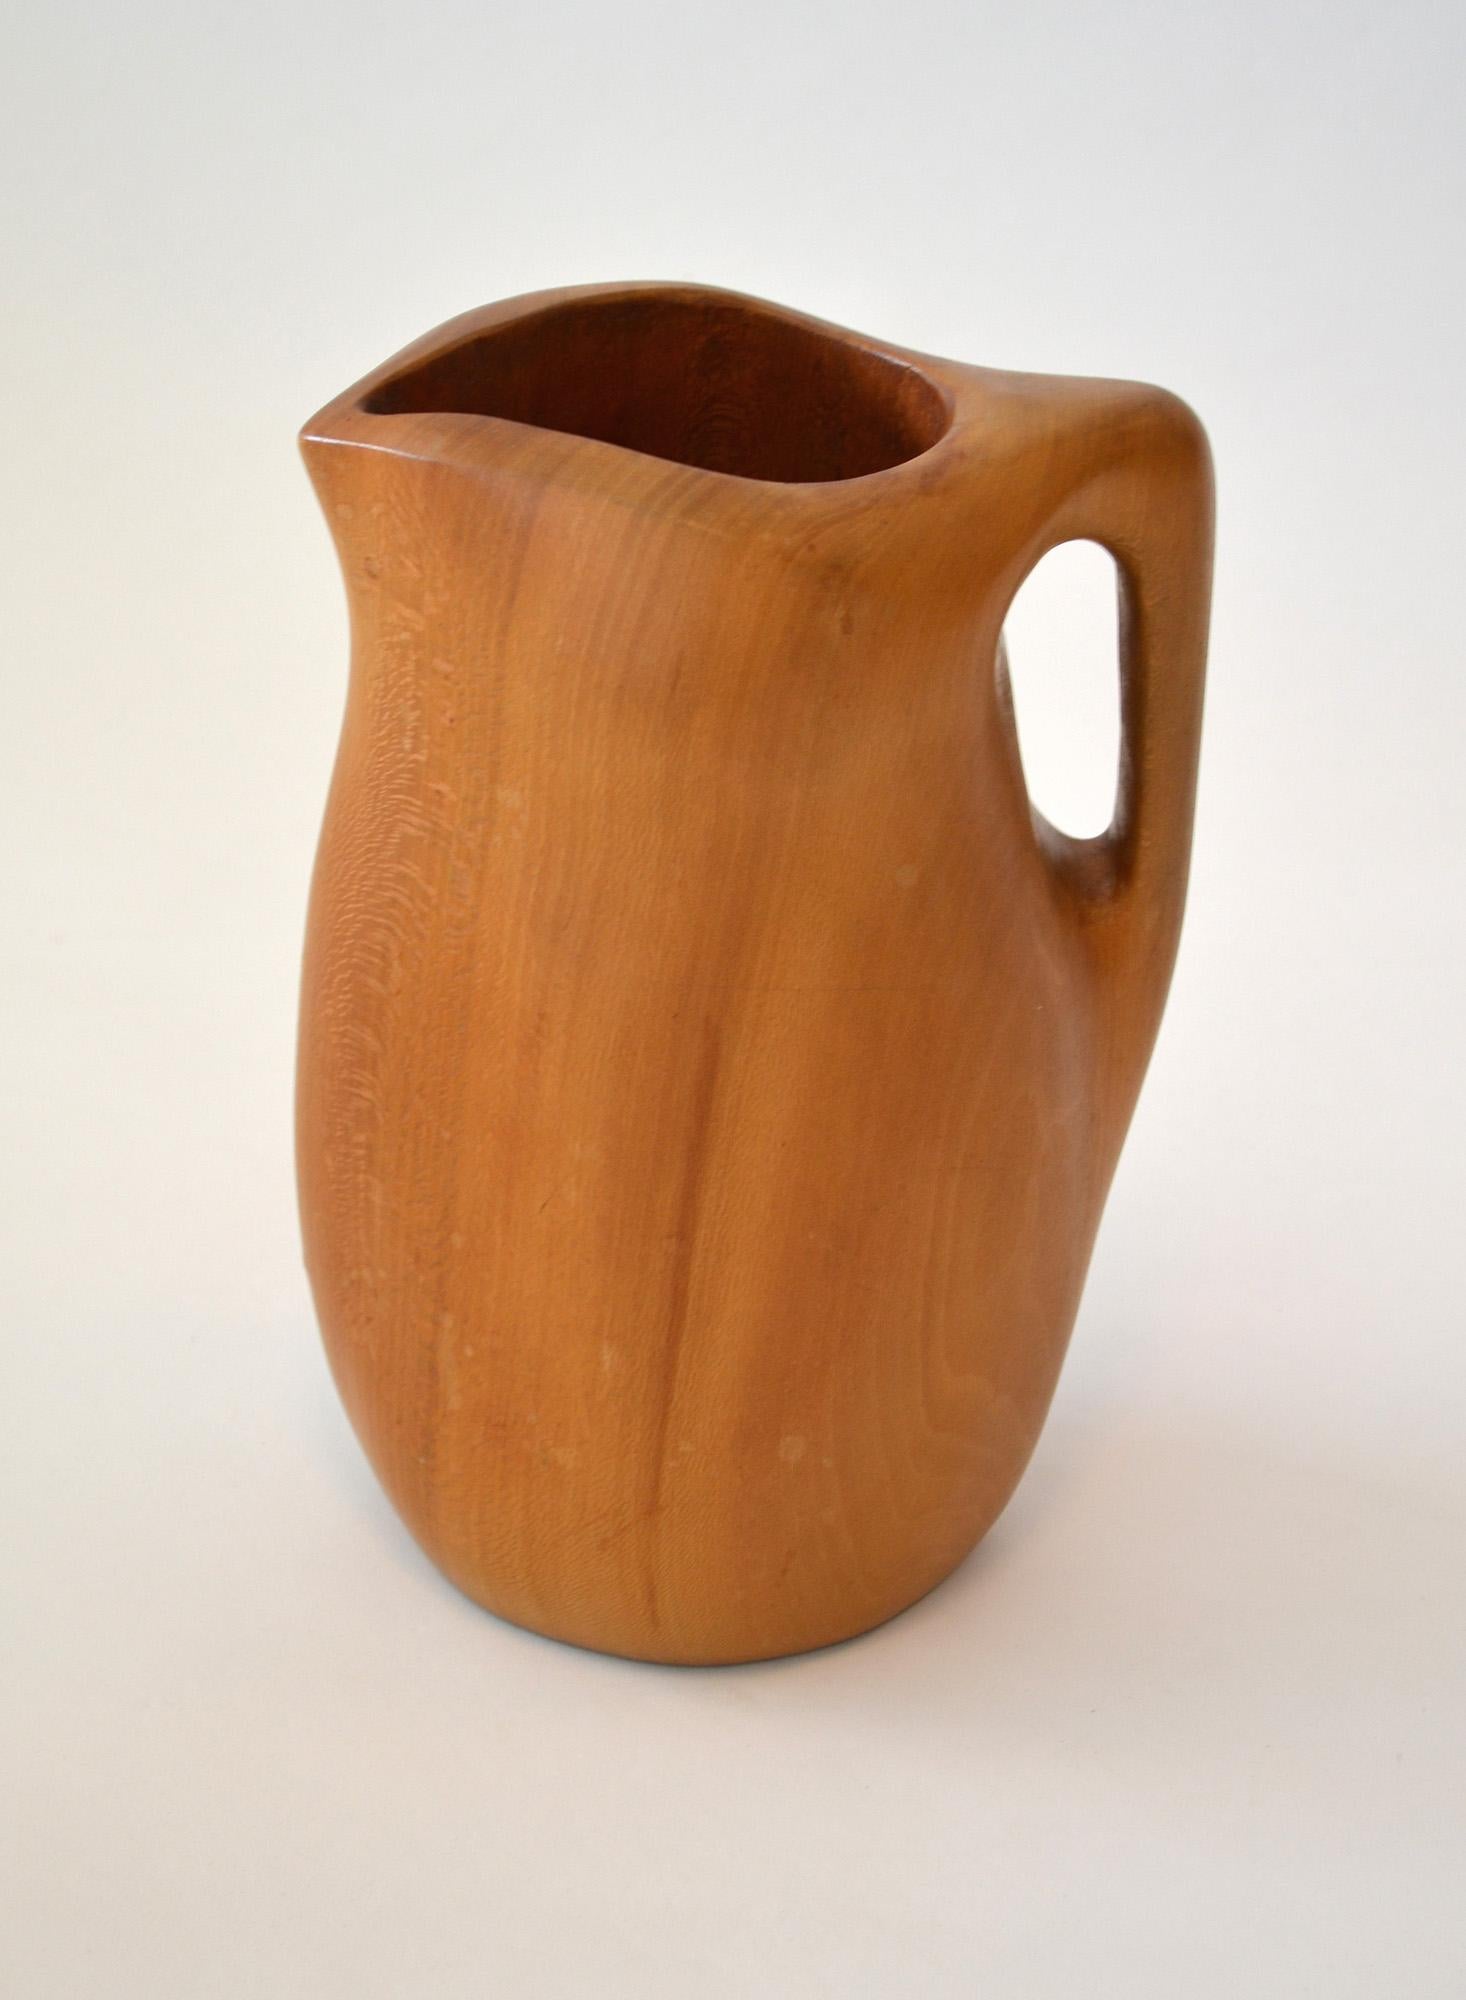 Alexandre Noll Pitcher in Carved Sycamore France c. 1950 

Acquired from the estate of a former Saks Fifth Avenue Executive. This rare piece was presented by Noll as a sample to Saks marketing department c. 1950.

Beautiful natural organic form, in